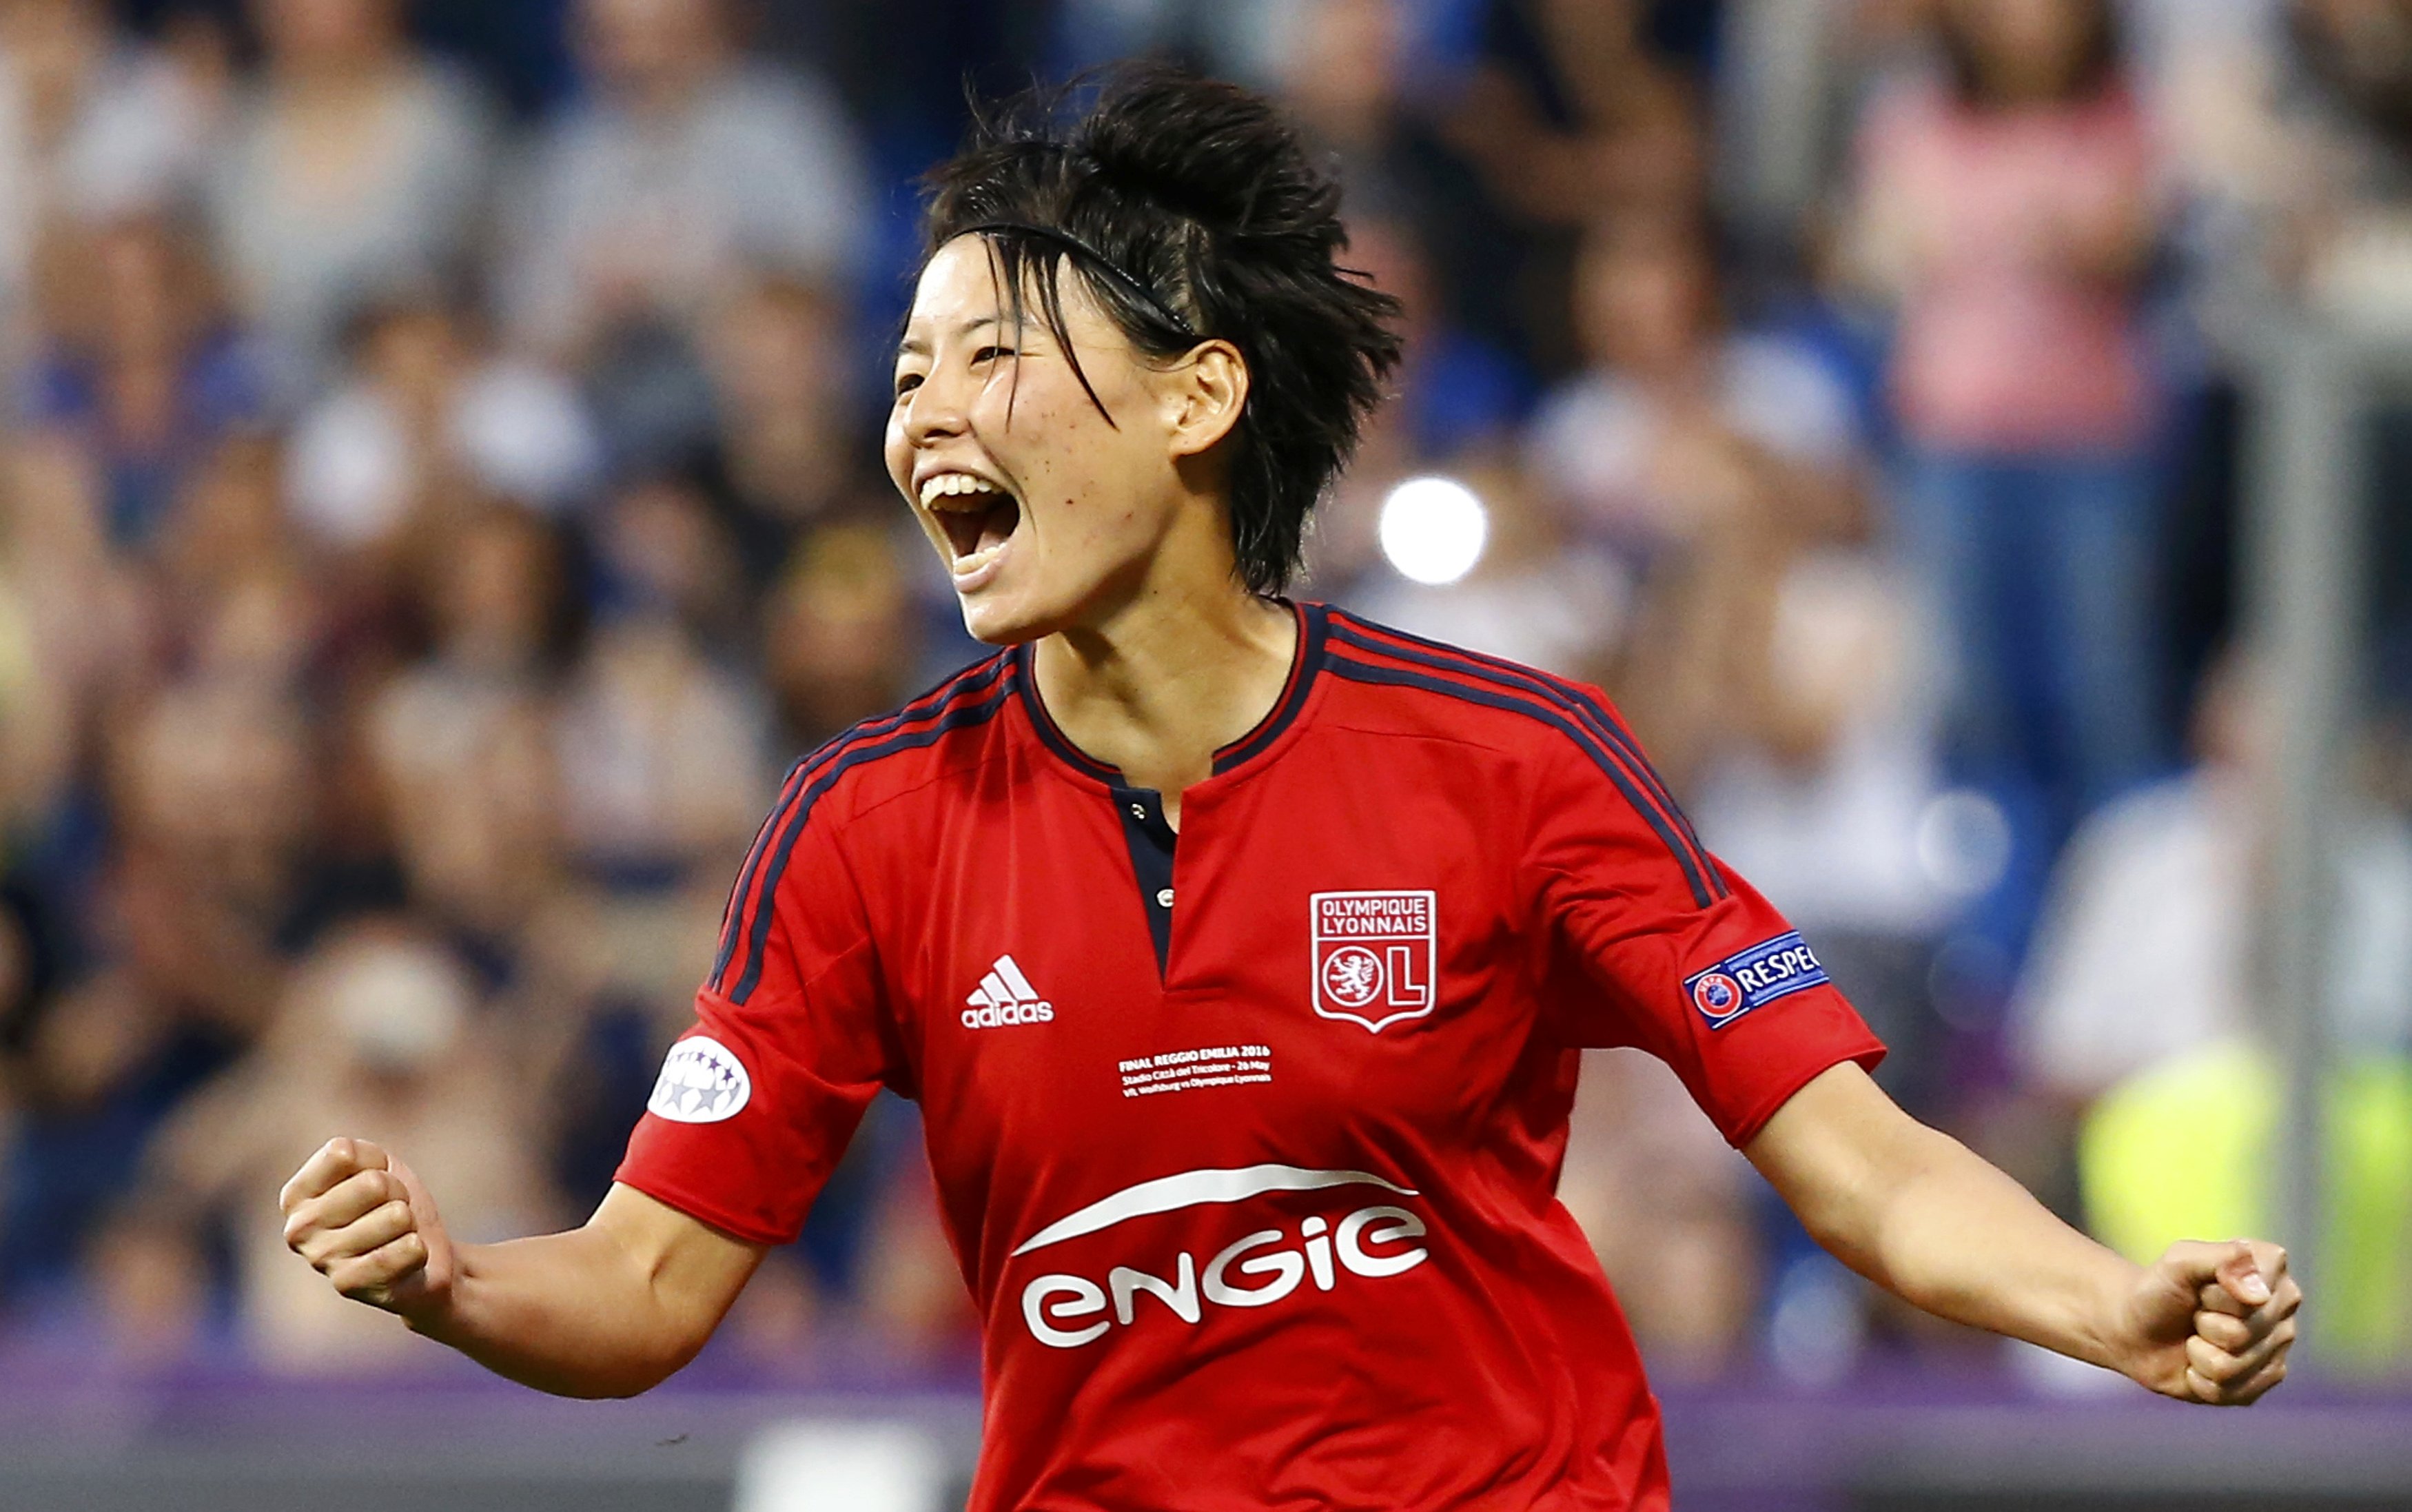 Kumagai penalty helps secure Champions League title for Lyon - The ...